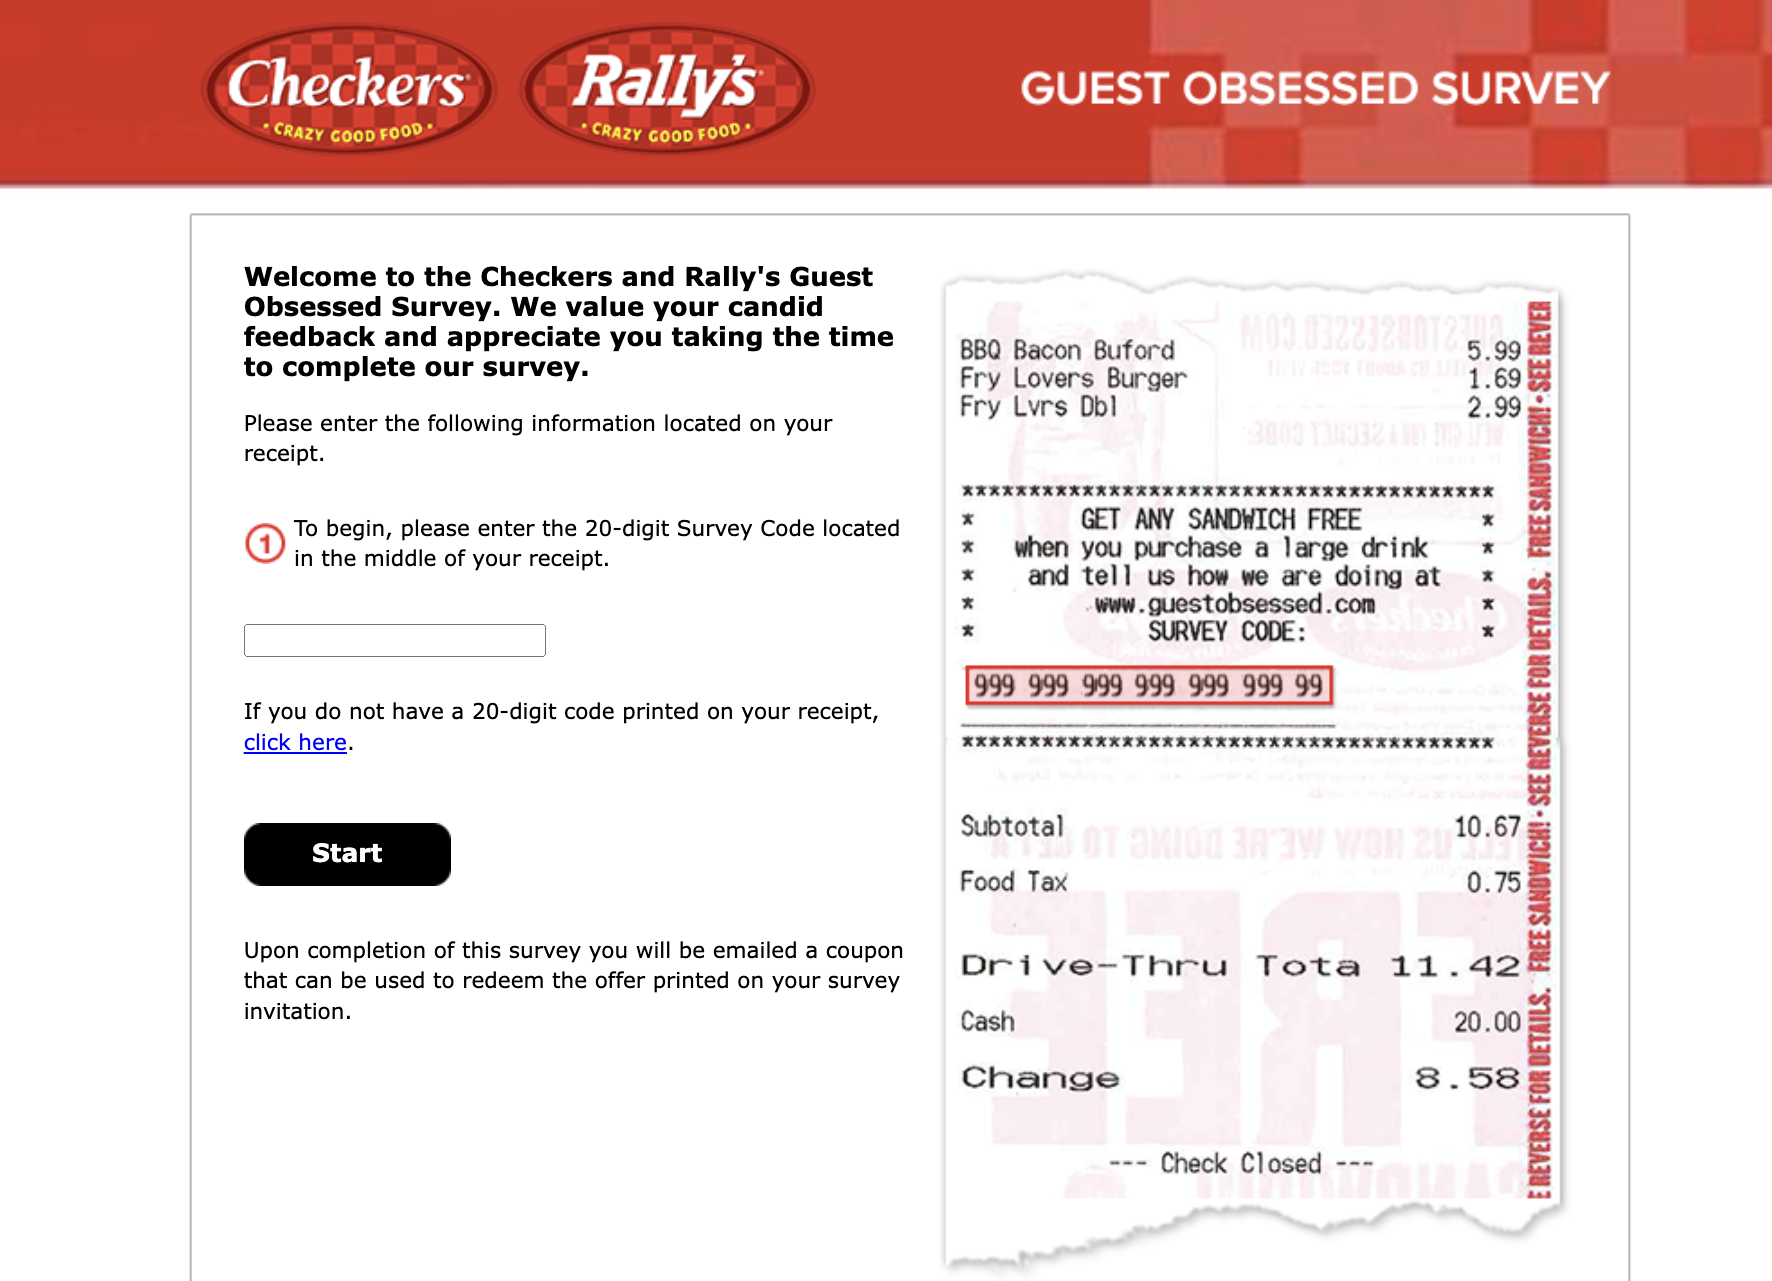 GuestObsessed.com – Checkers and Rally’s Guest Obsessed Survey